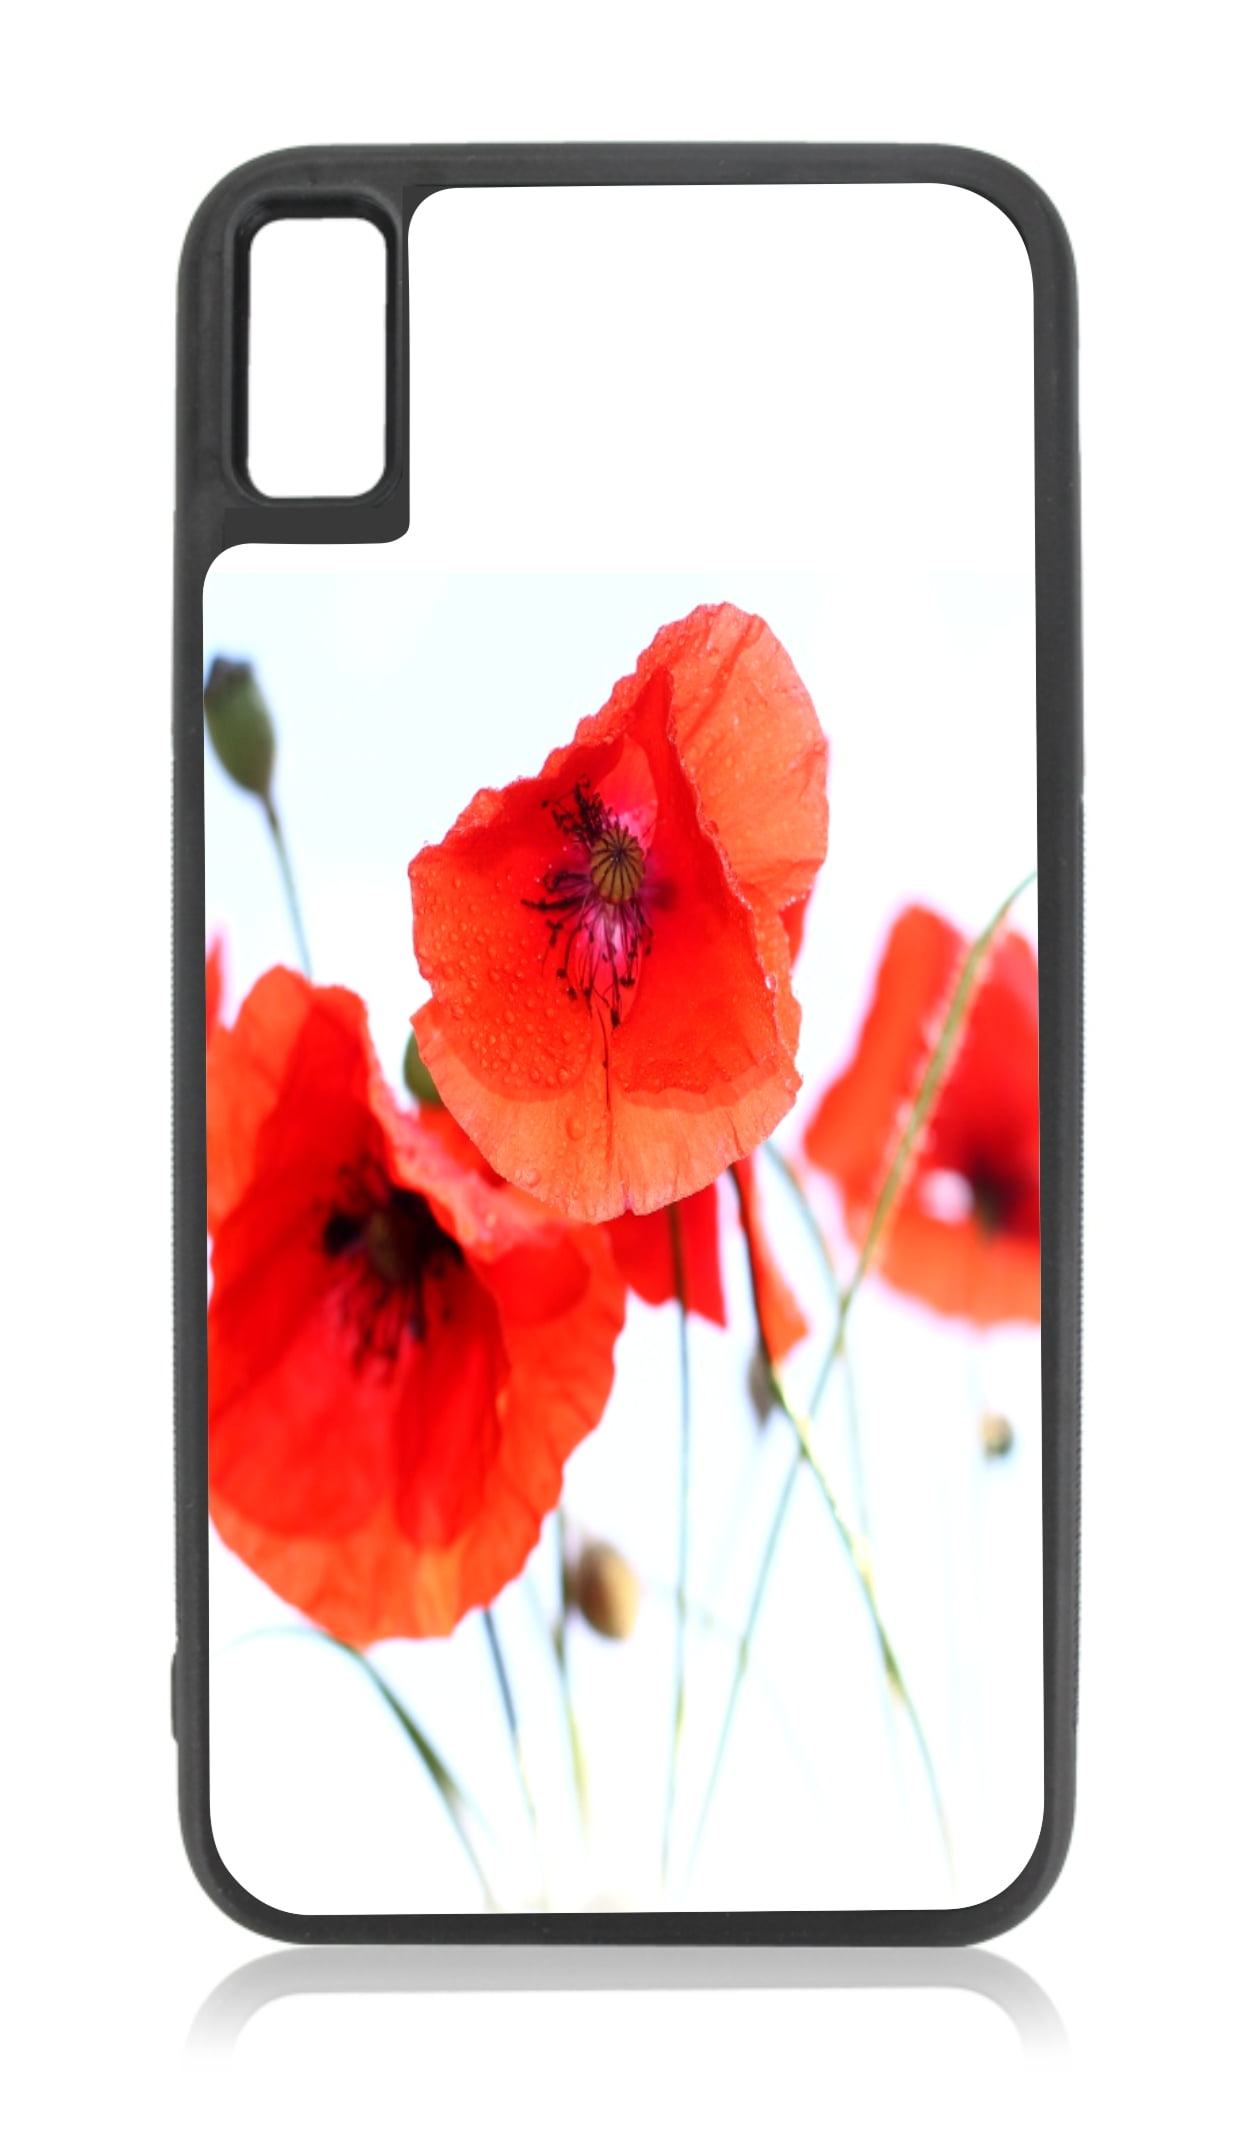 Red Poppy Flowers Iphone X Floral Case Iphone 10s Flower Case Black Rubber Case Cover For The Apple Iphone 10 Iphone X Iphone Xs Iphone 10 Case